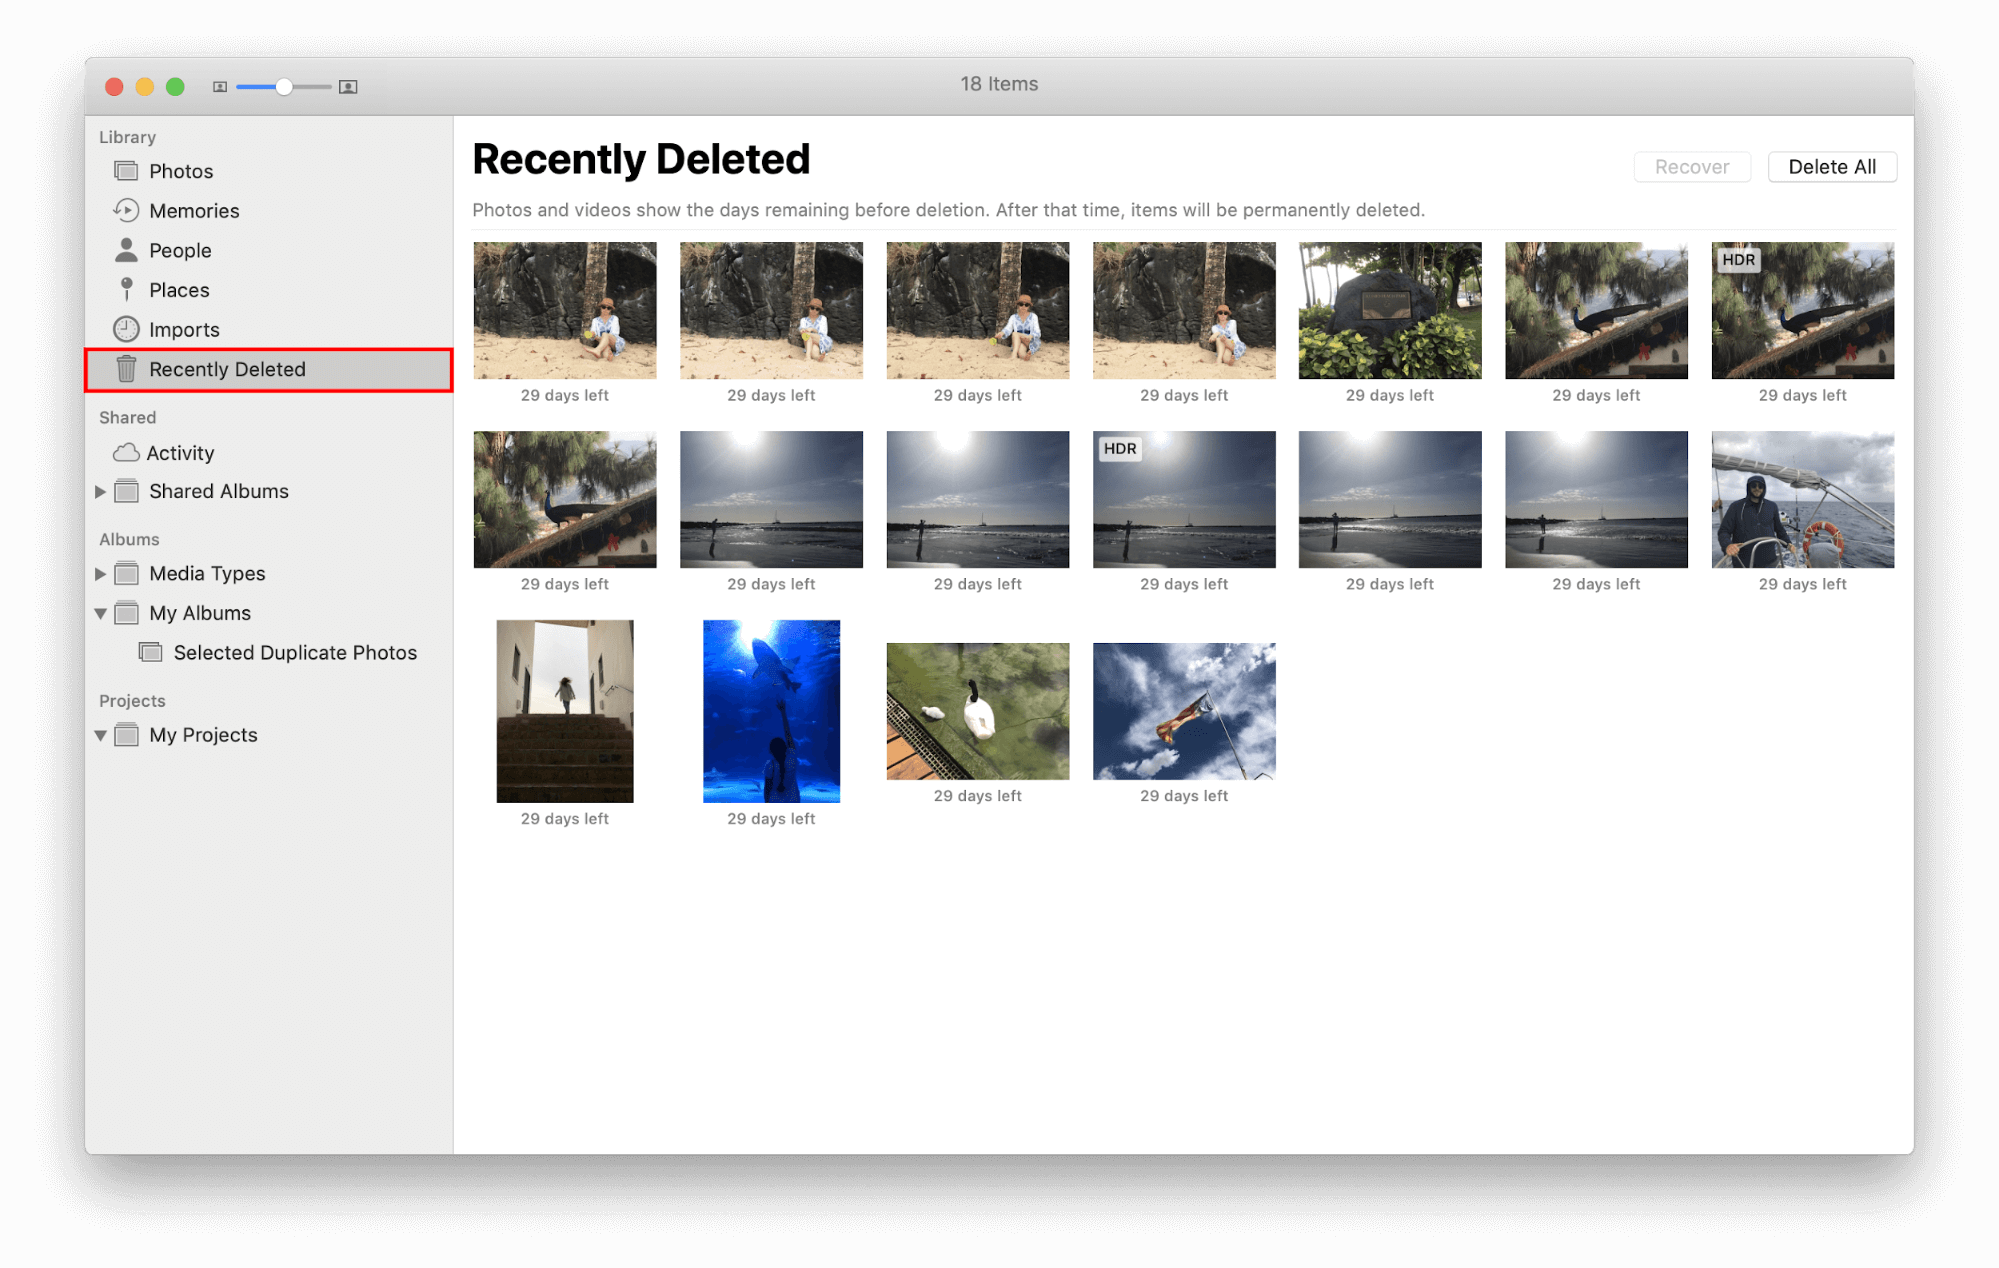 How to delete all photos from photo library on mac